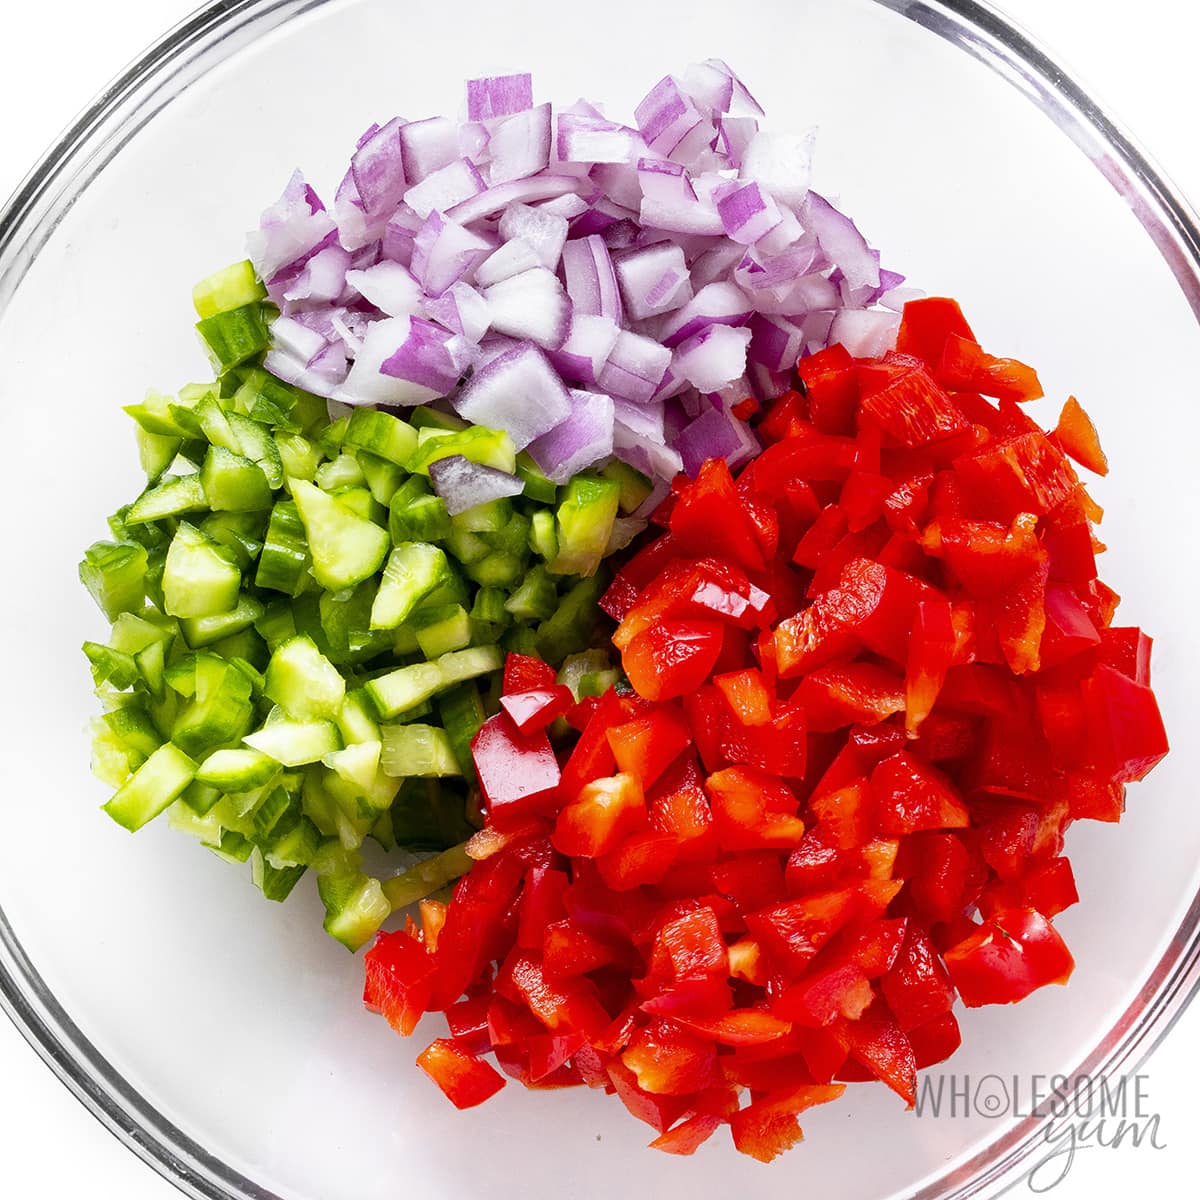 Chopped vegetables in a bowl.